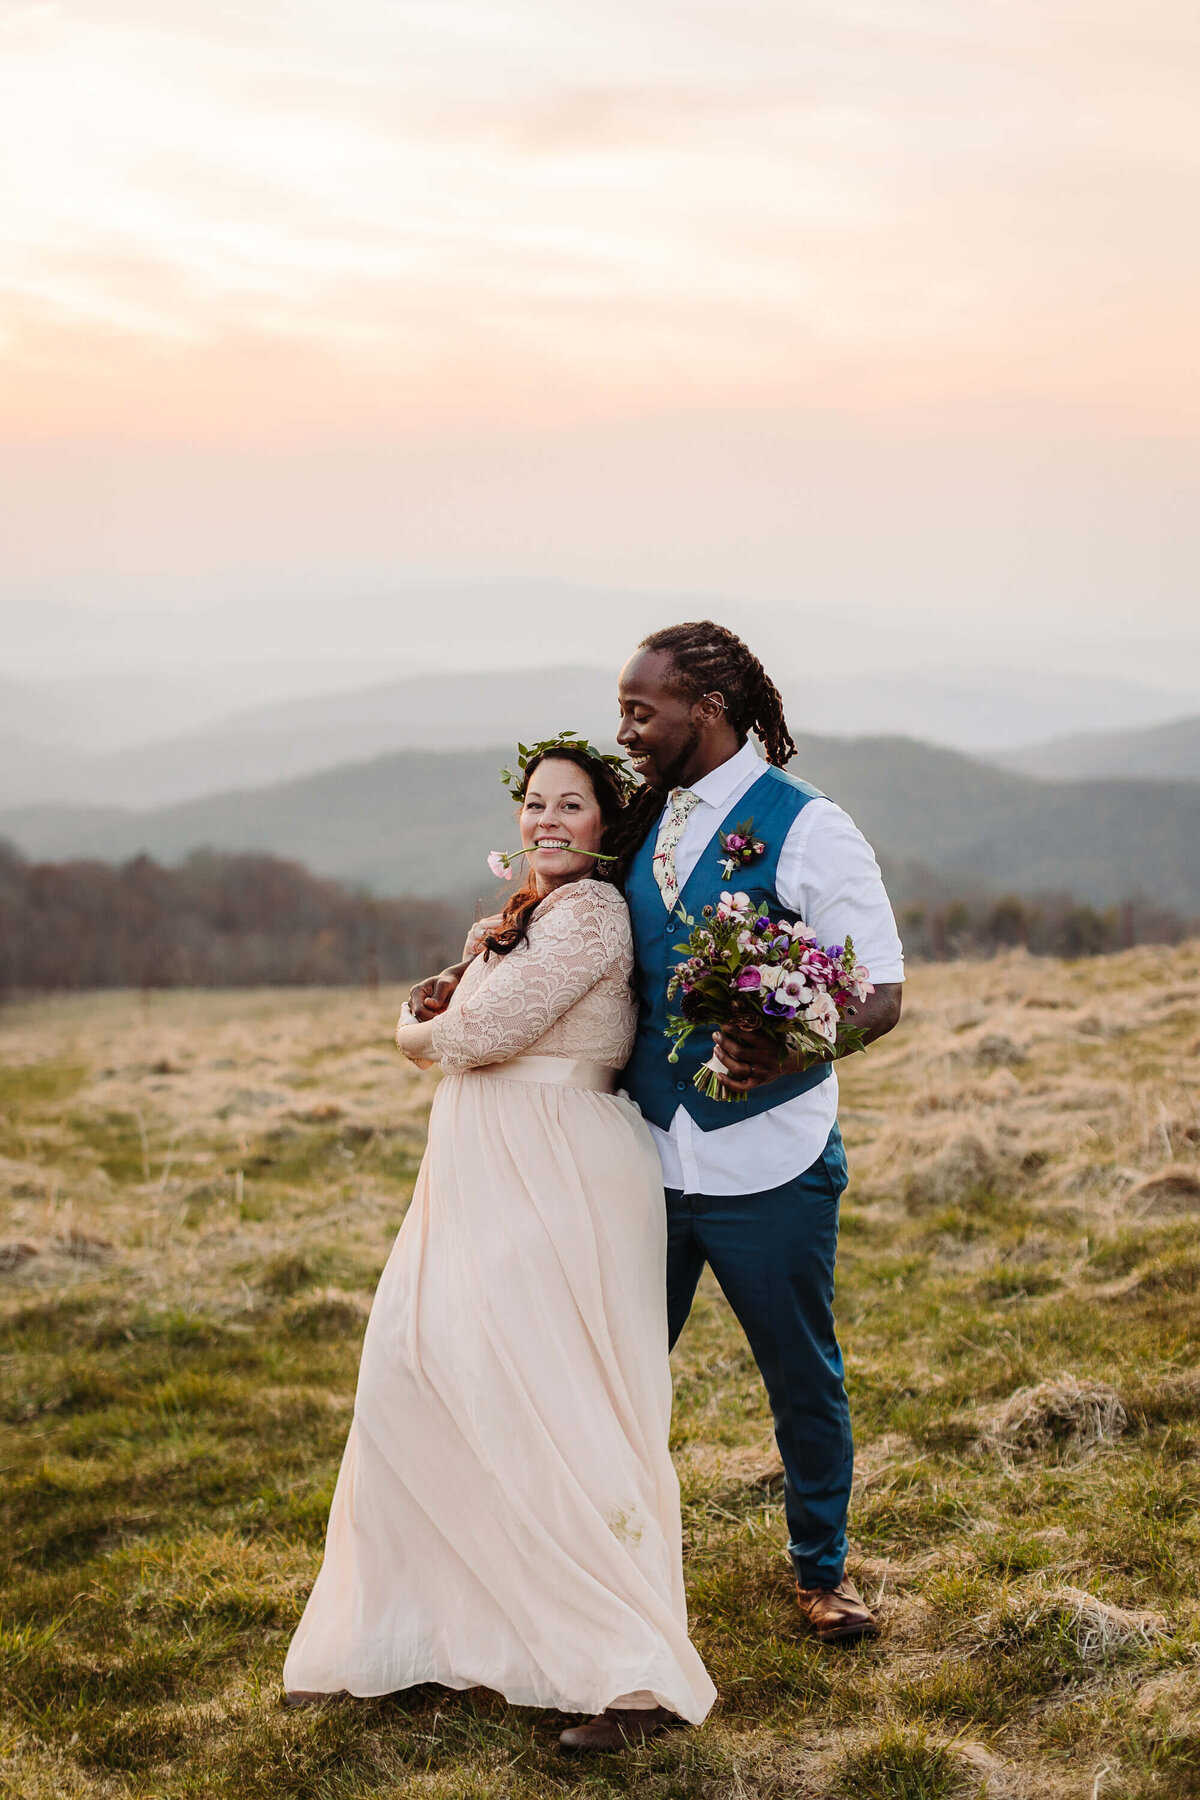 Max-Patch-Sunset-Mountain-Elopement-123